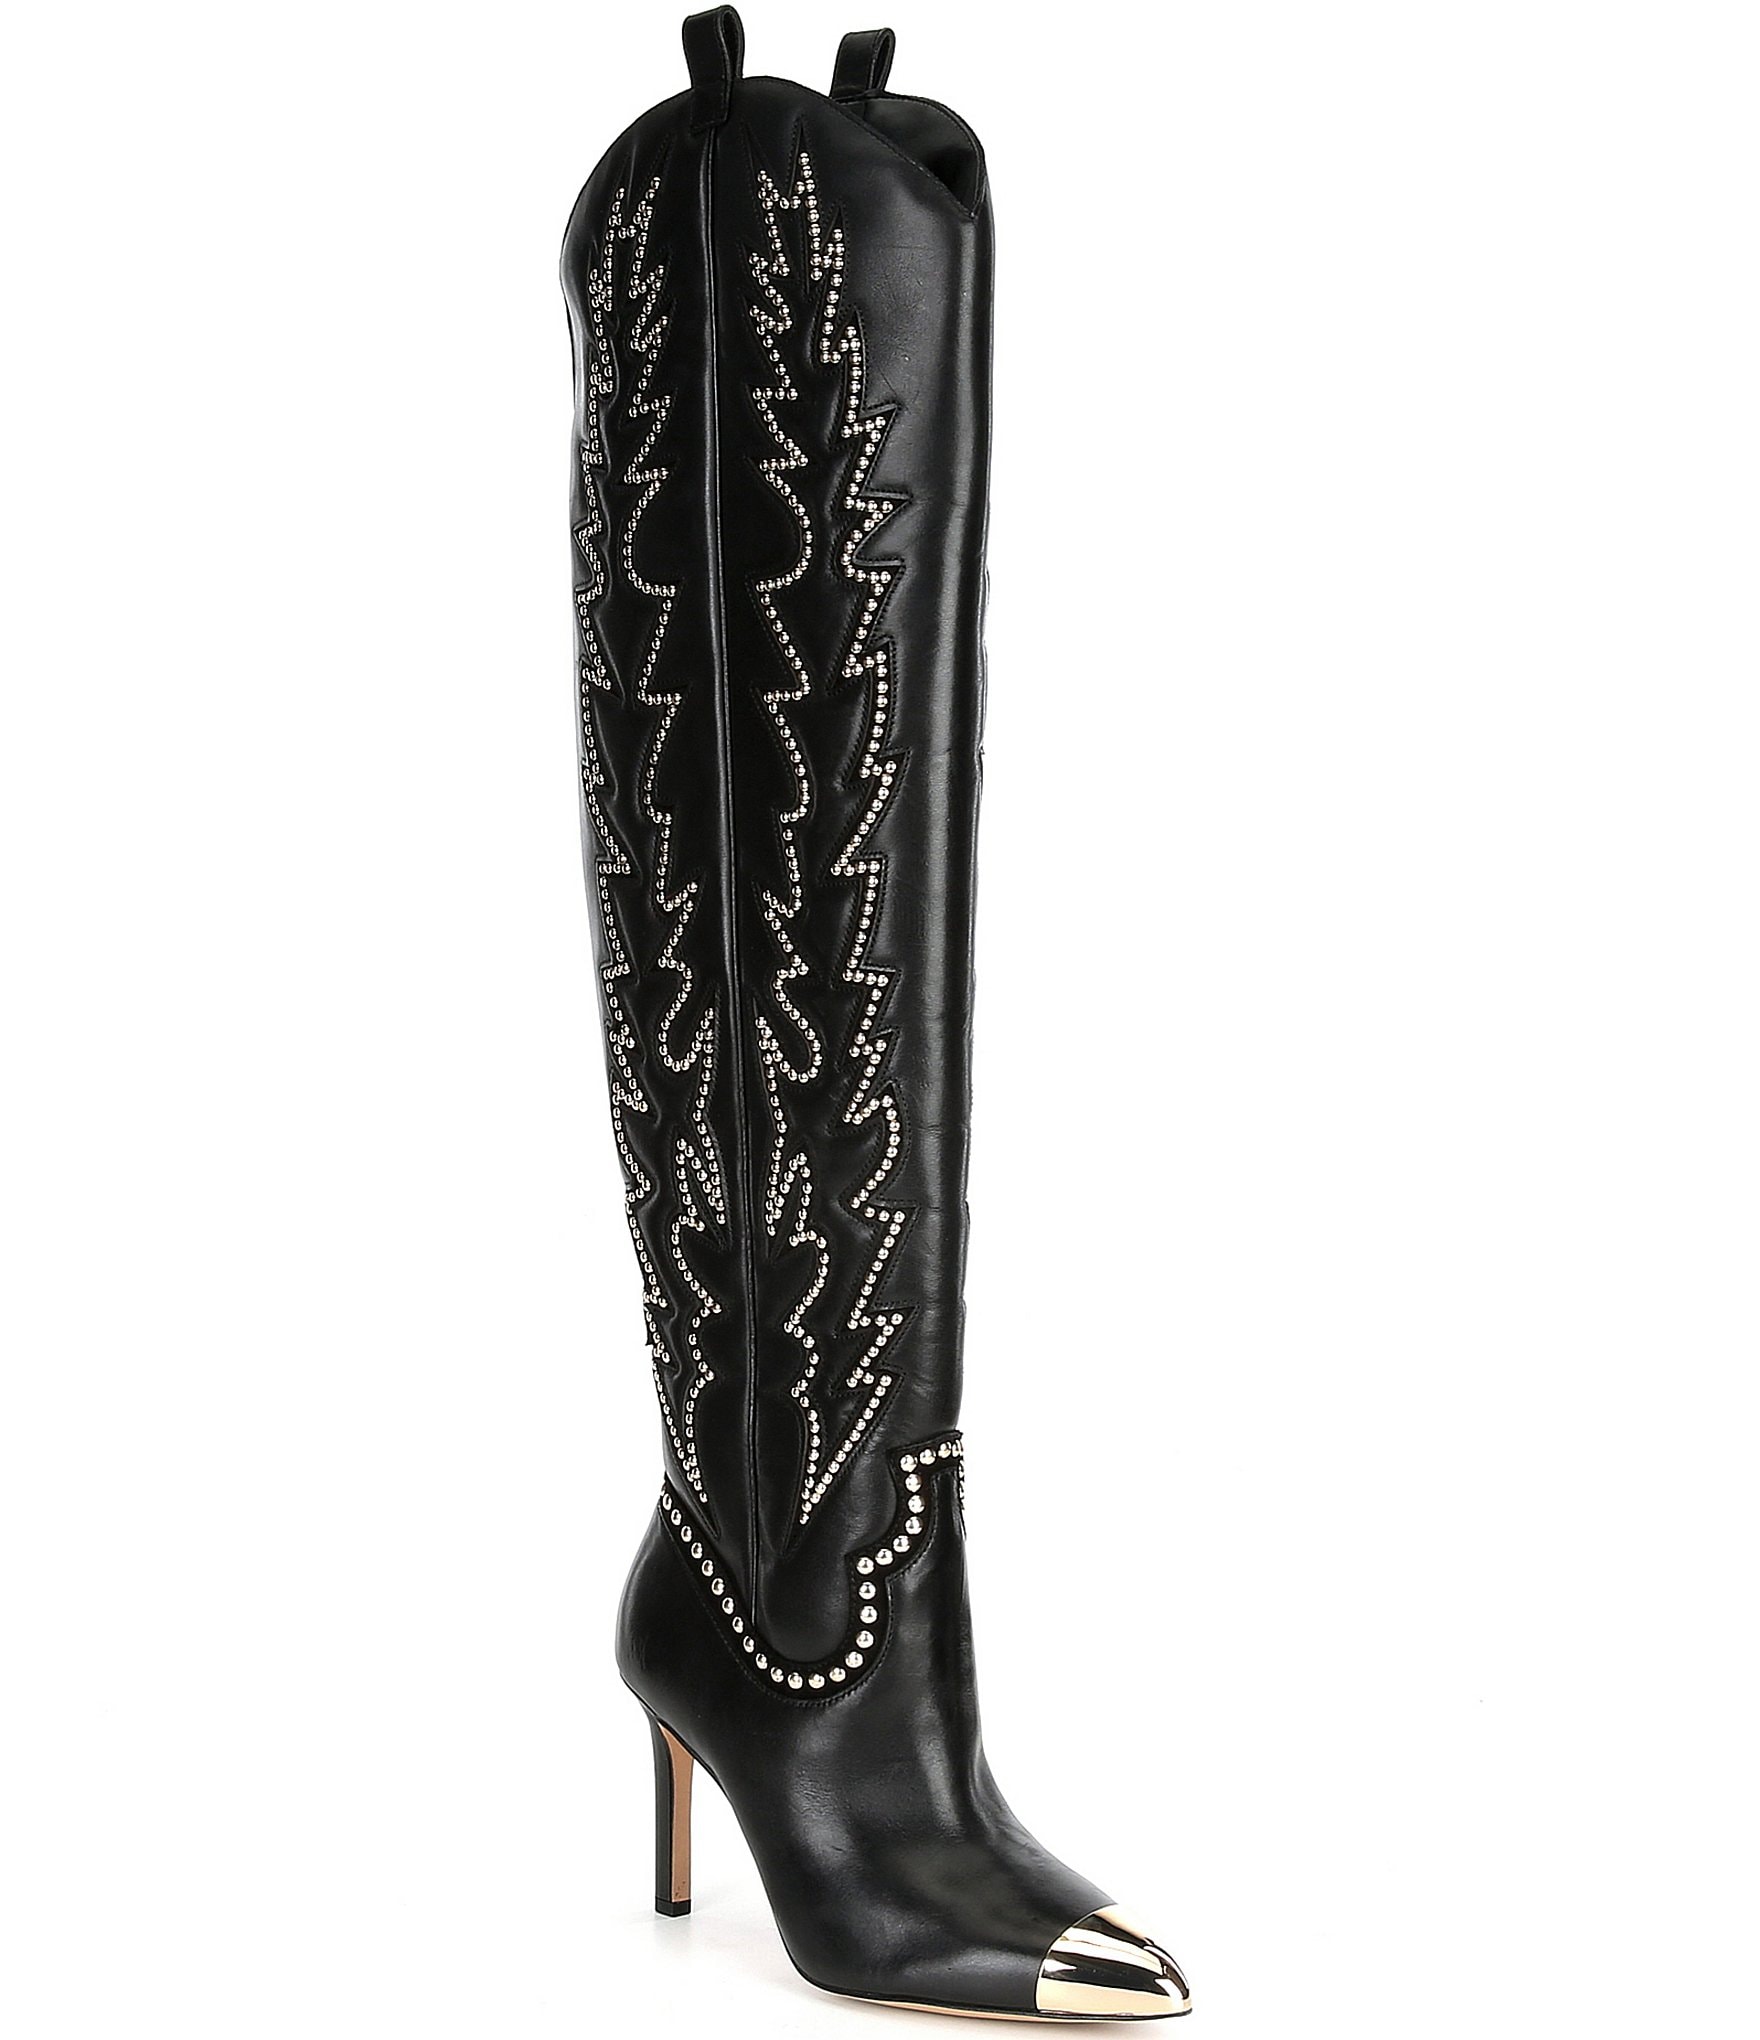 Gianni Bini Katerina Leather Studded Over-the-Knee Western Dress Boots ...